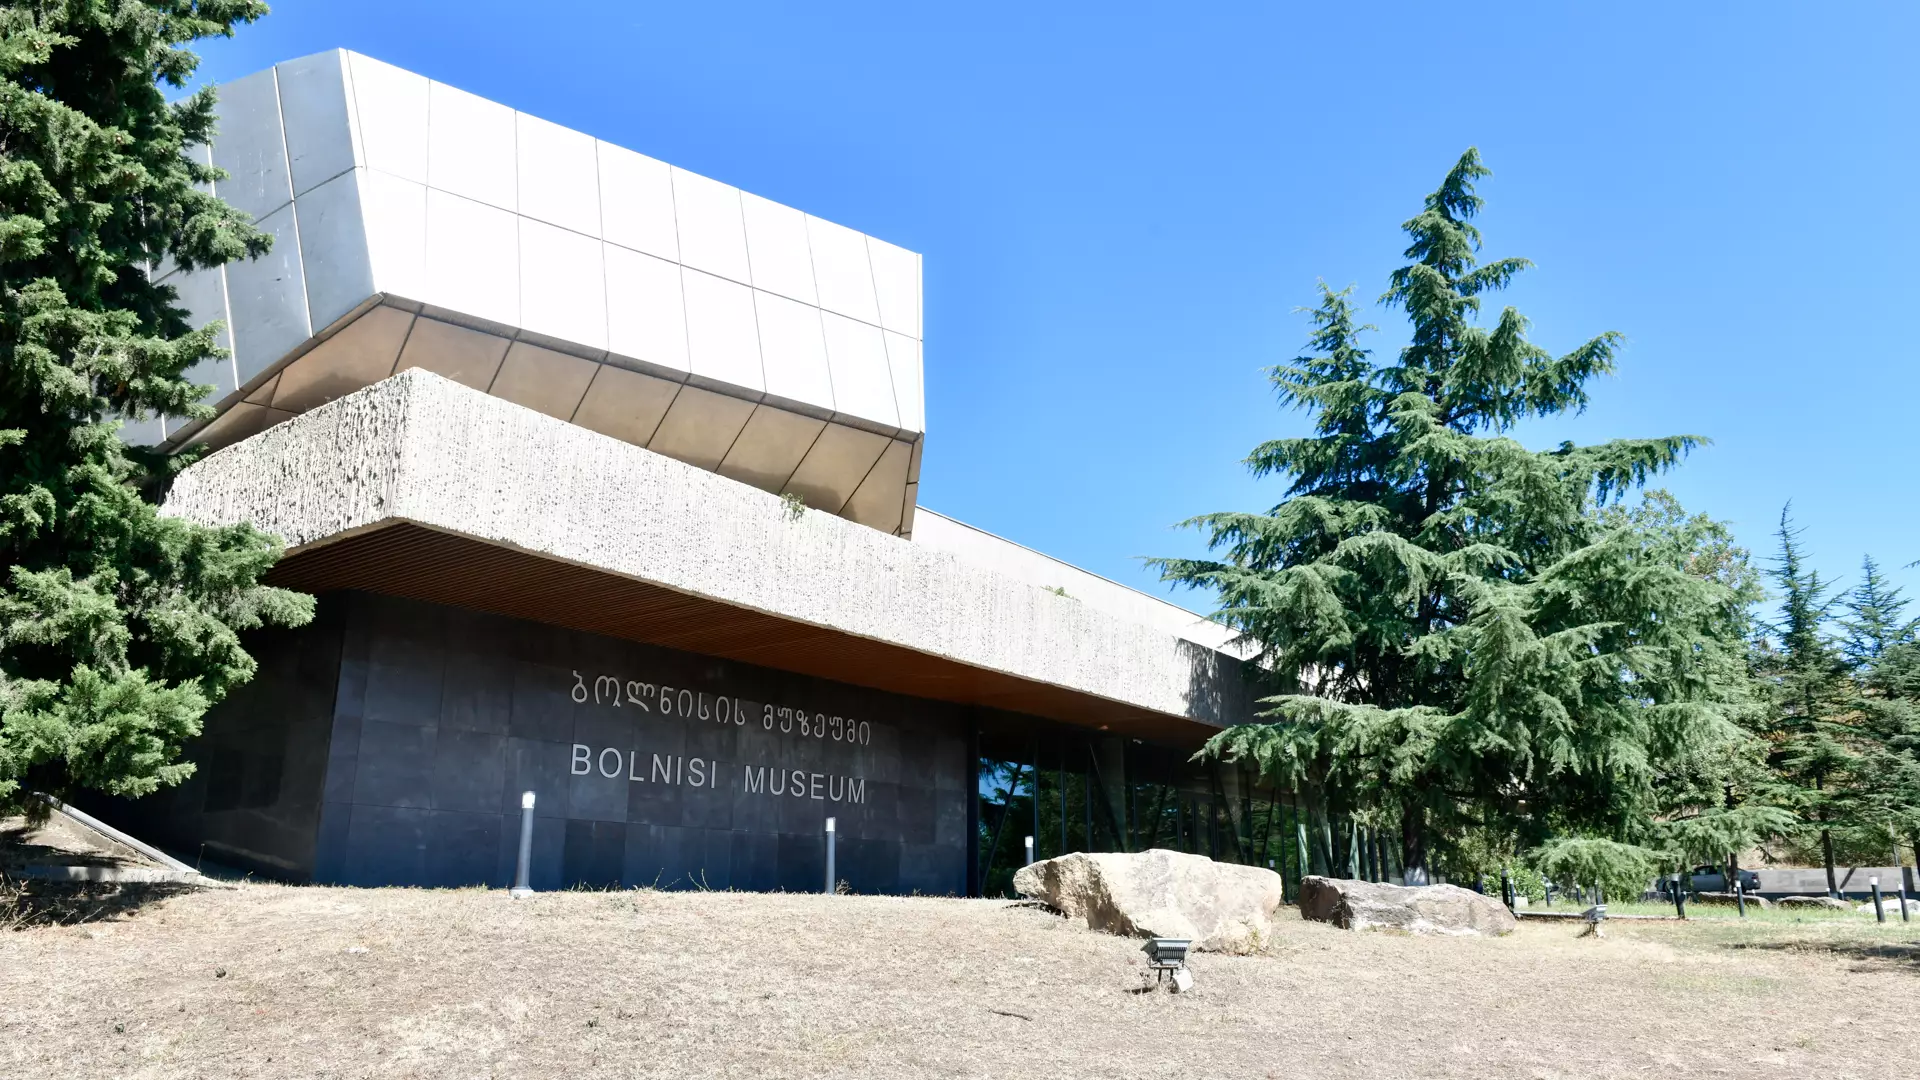 Bolnisi Museum - A Real Repository of the Ancient History of Georgia